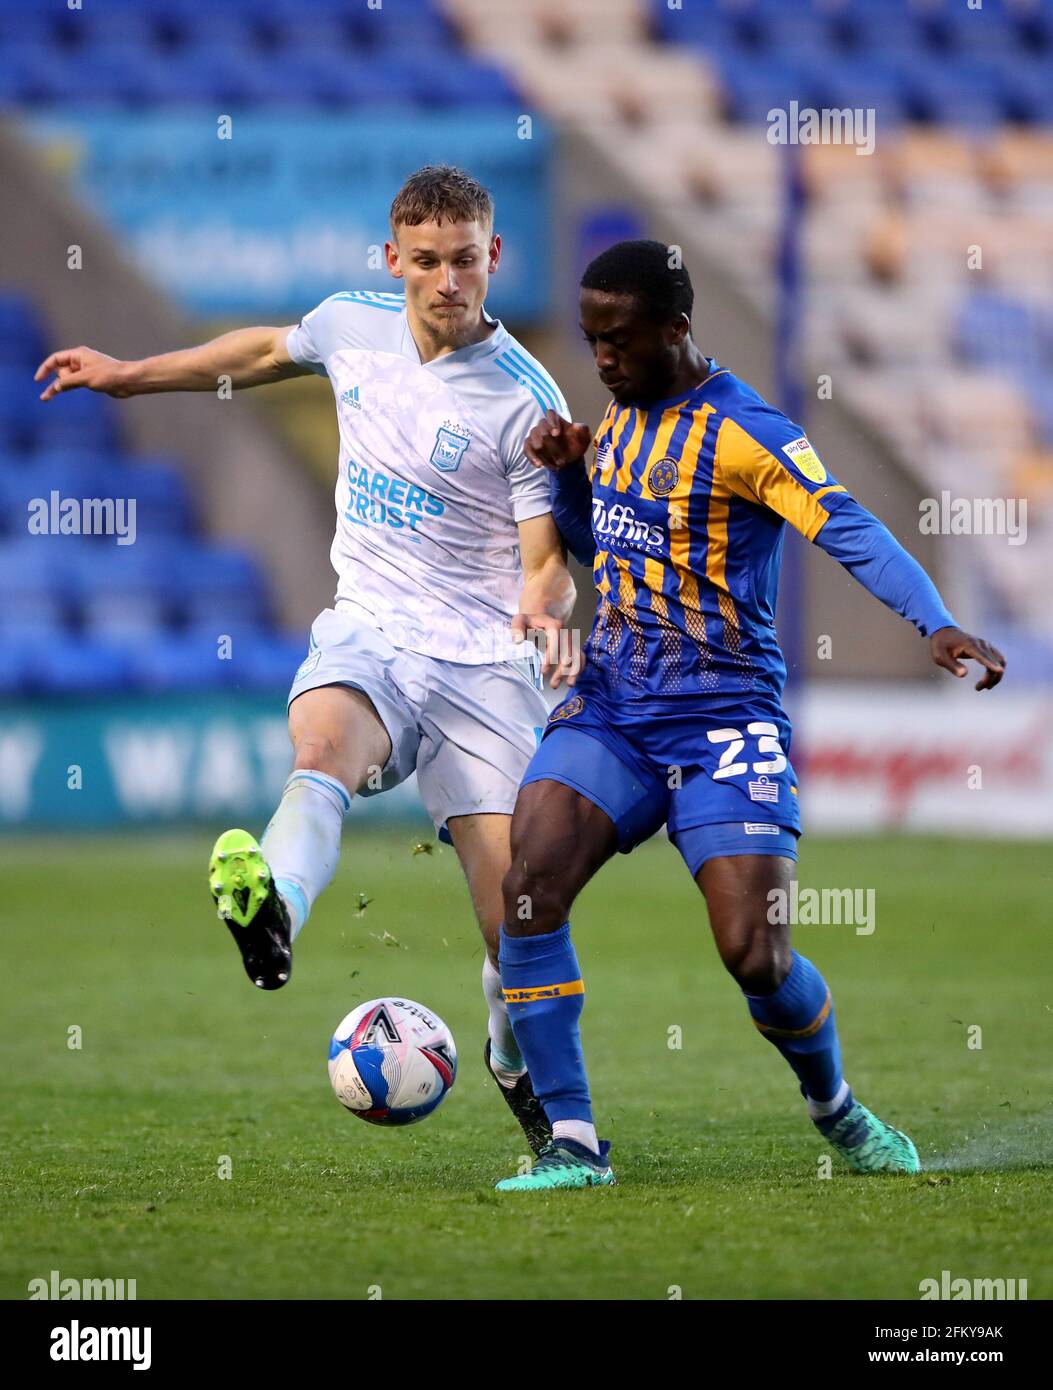 Shrewsbury Town's Daniel Udoh (right) and Ipswich Town's Luke Woolfenden battle for the ball during the Sky Bet League One match at Montgomery Waters Meadow, Shrewsbury. Picture date: Tuesday May 4, 2021. Stock Photo